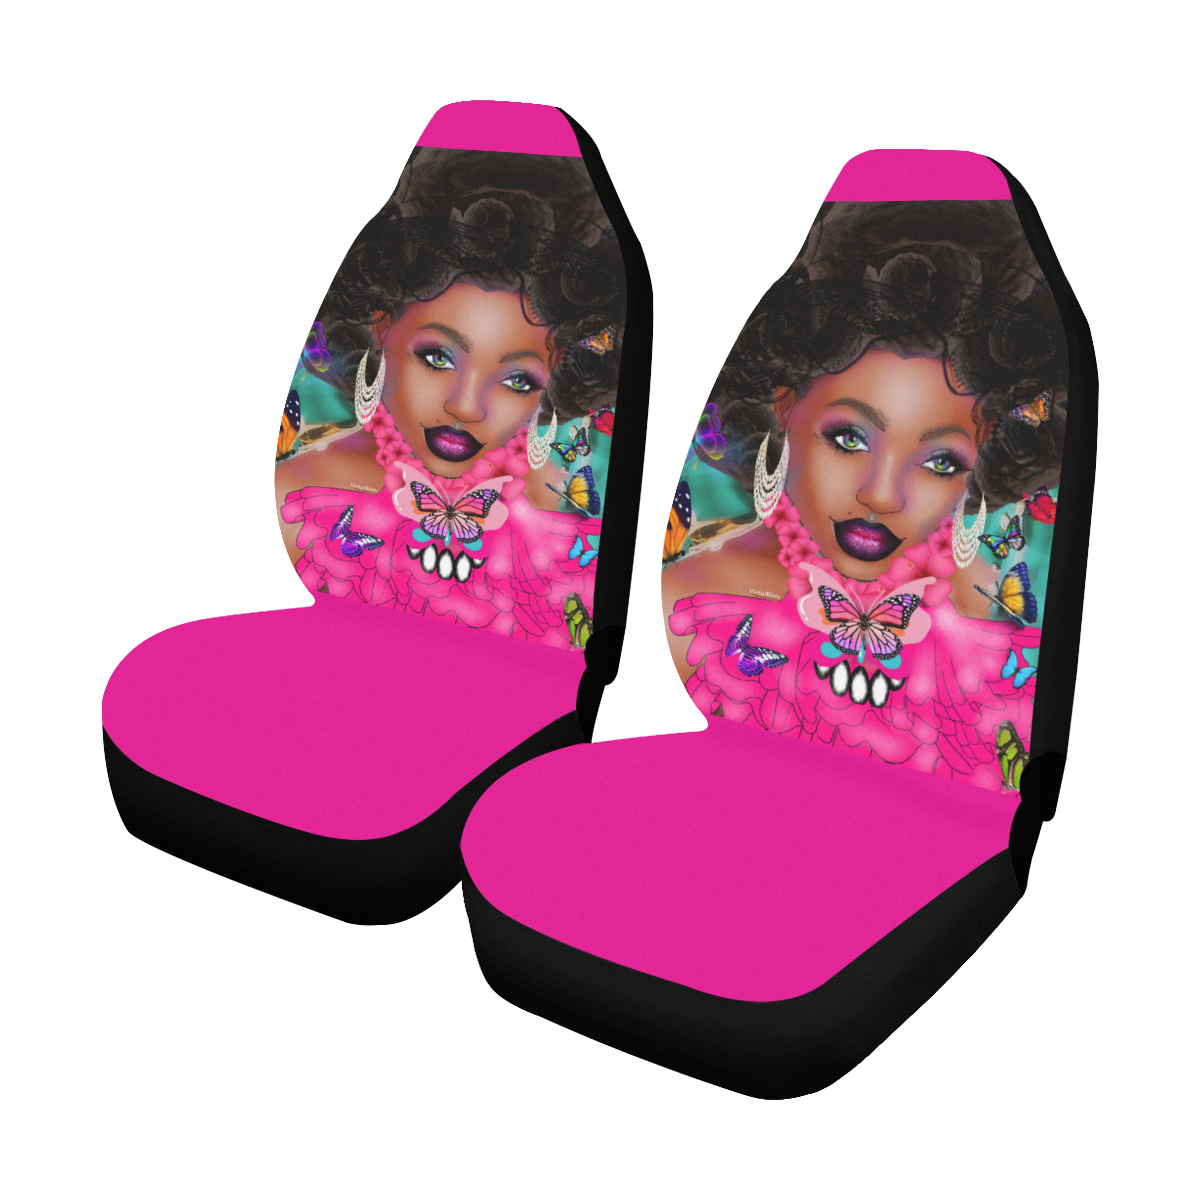 FLYYAYY SEAT COV HT PINK Car Seat Covers (Set of 2)